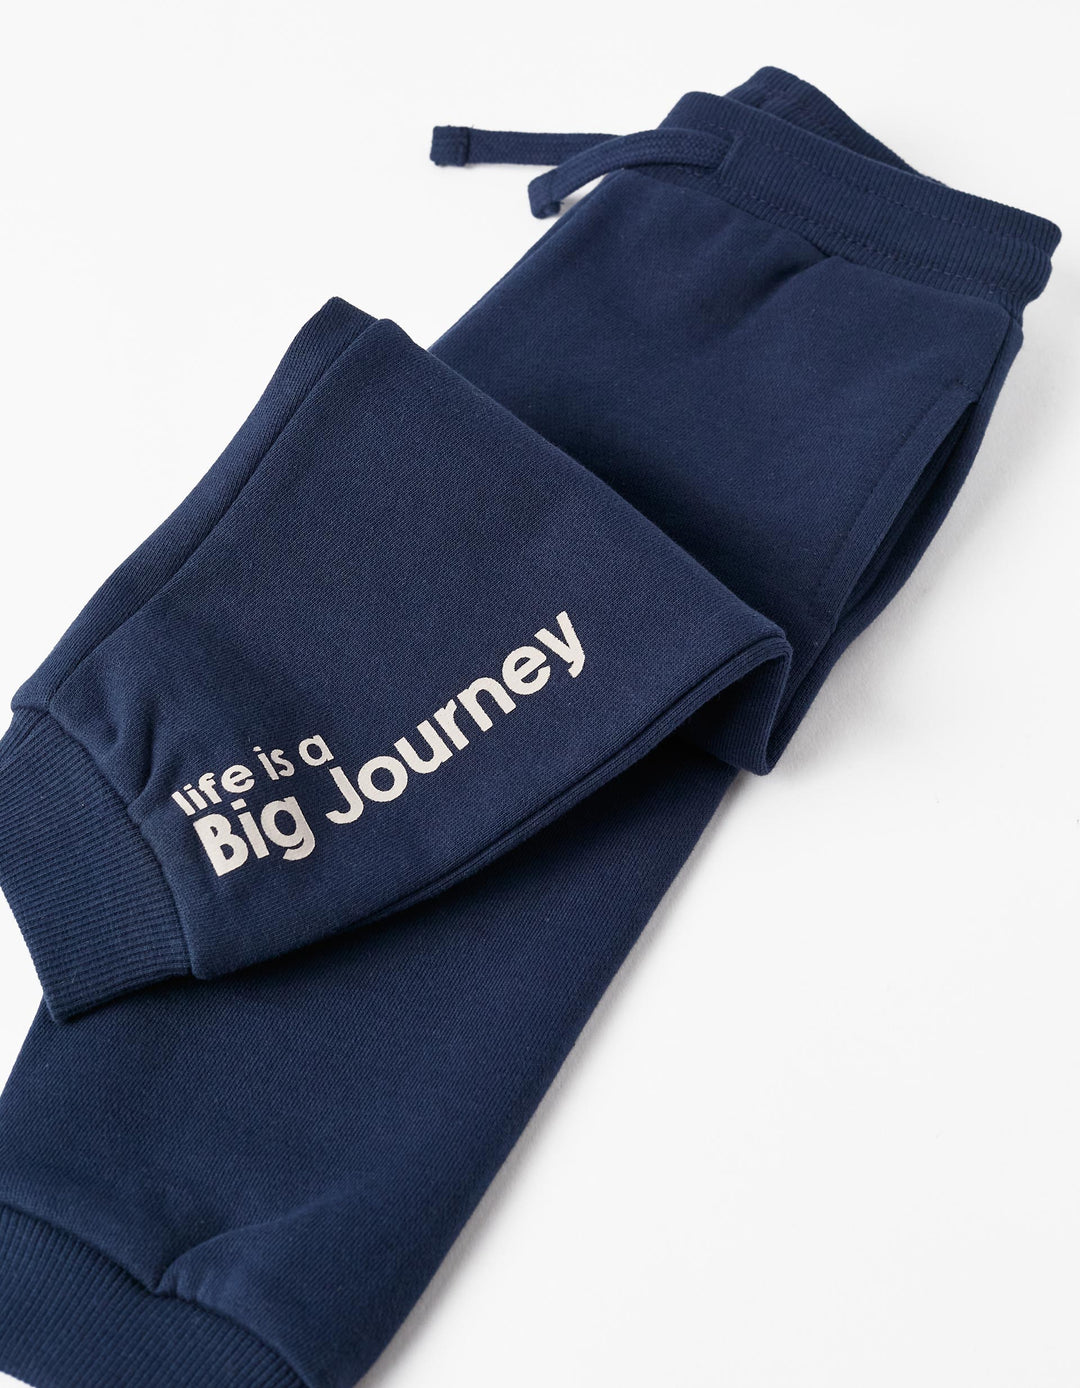 Cotton Joggers for Baby Boys, Dark Blue